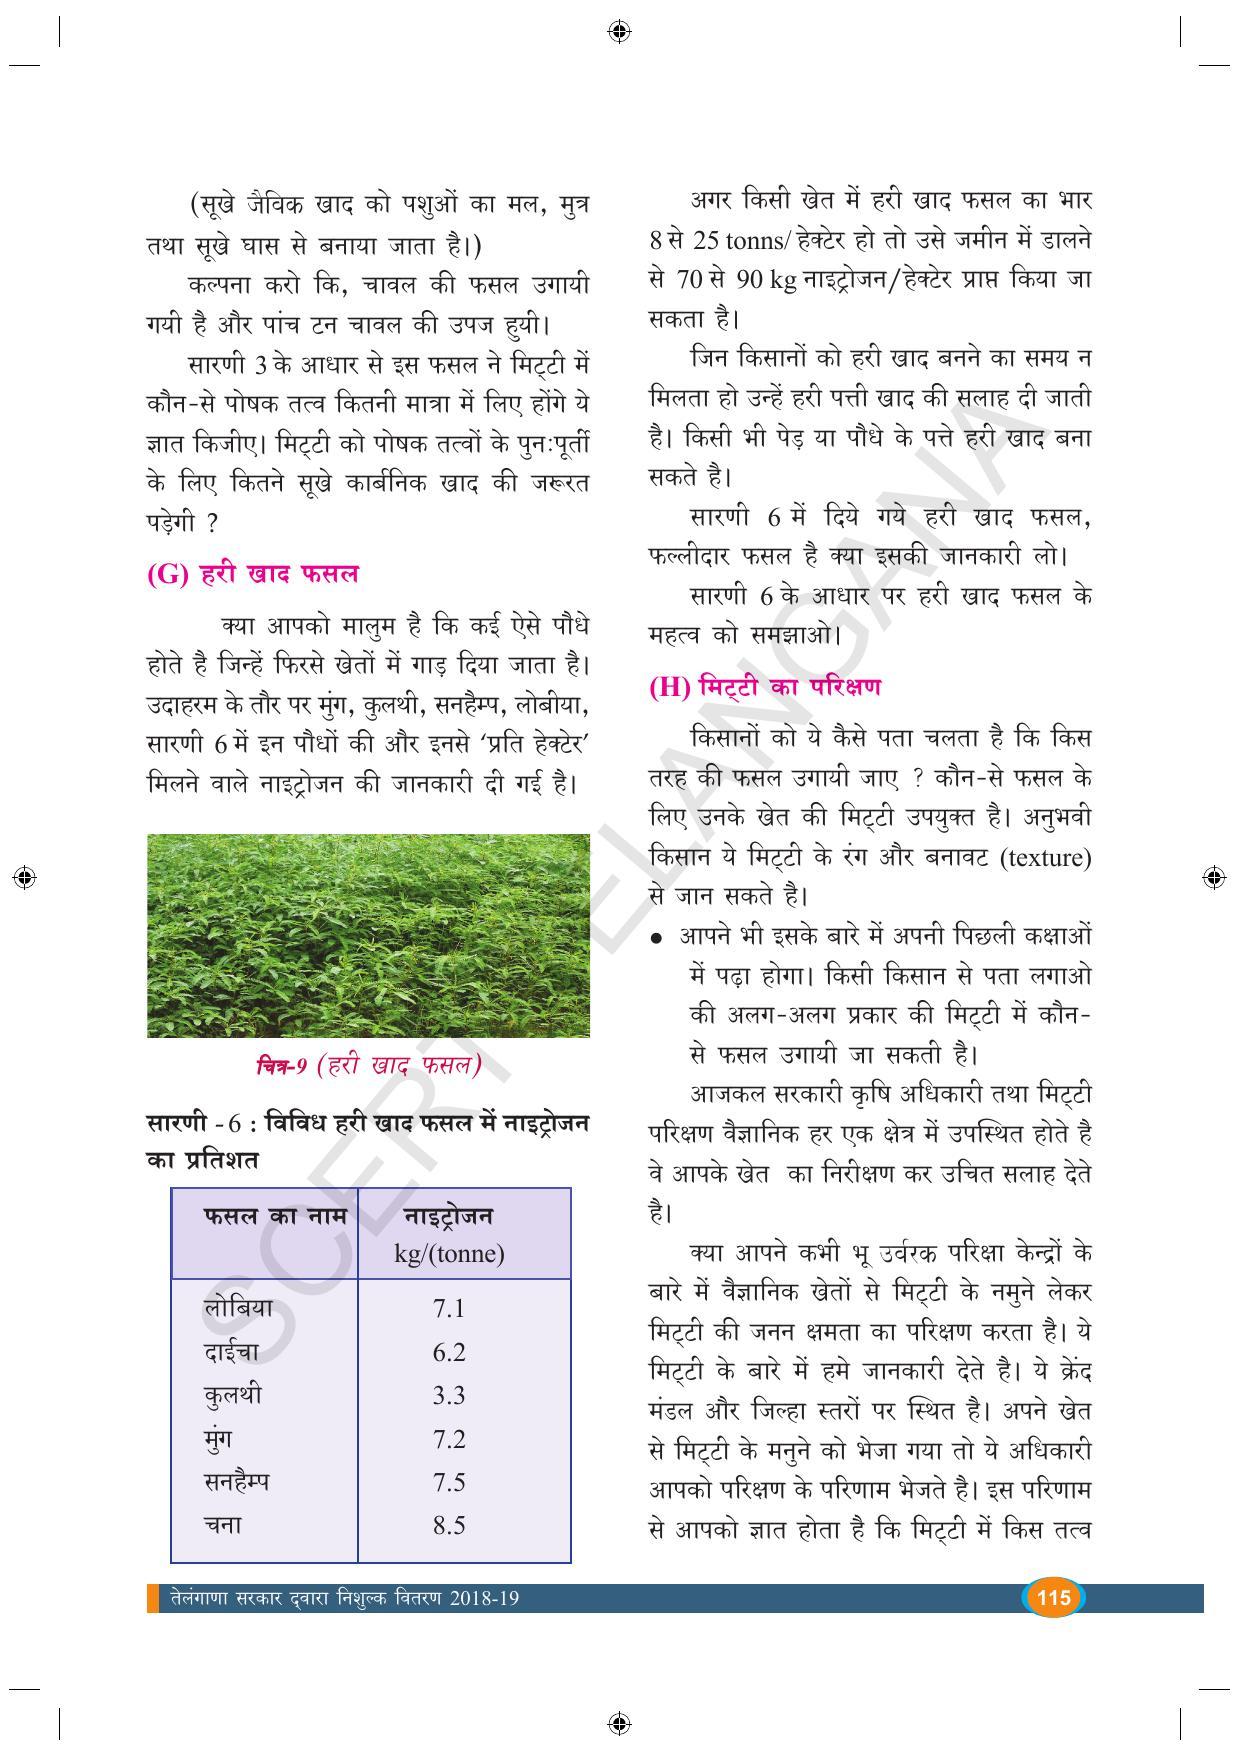 TS SCERT Class 9 Biological Science (Hindi Medium) Text Book - Page 127